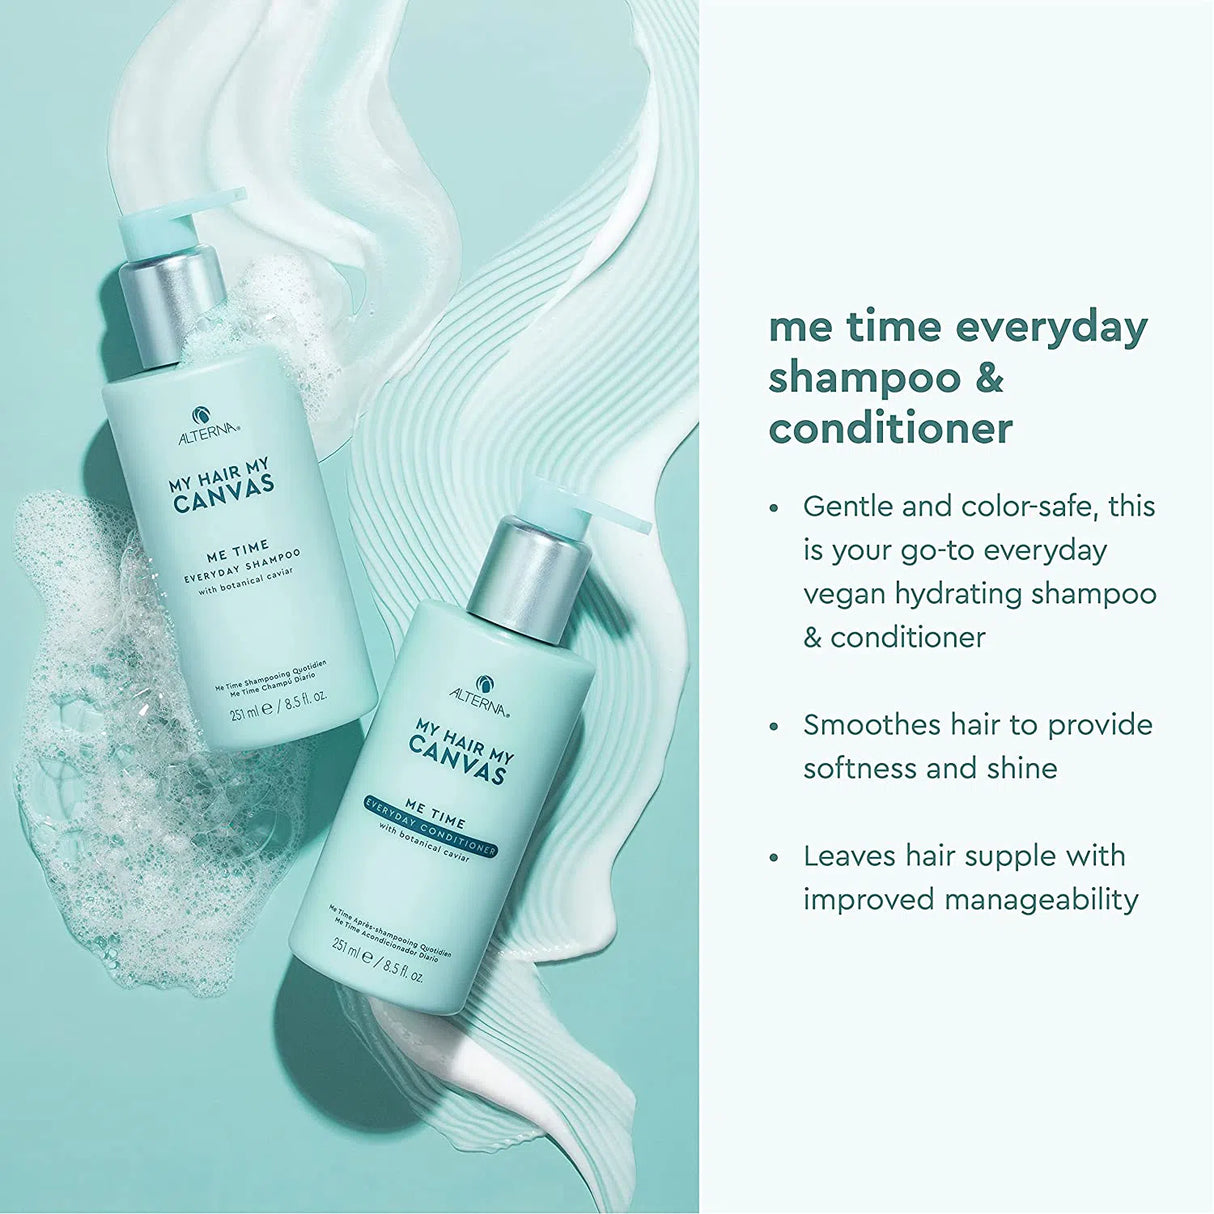 MY HAIR. MY CANVAS. ME TIME Everyday Conditioner-Alterna